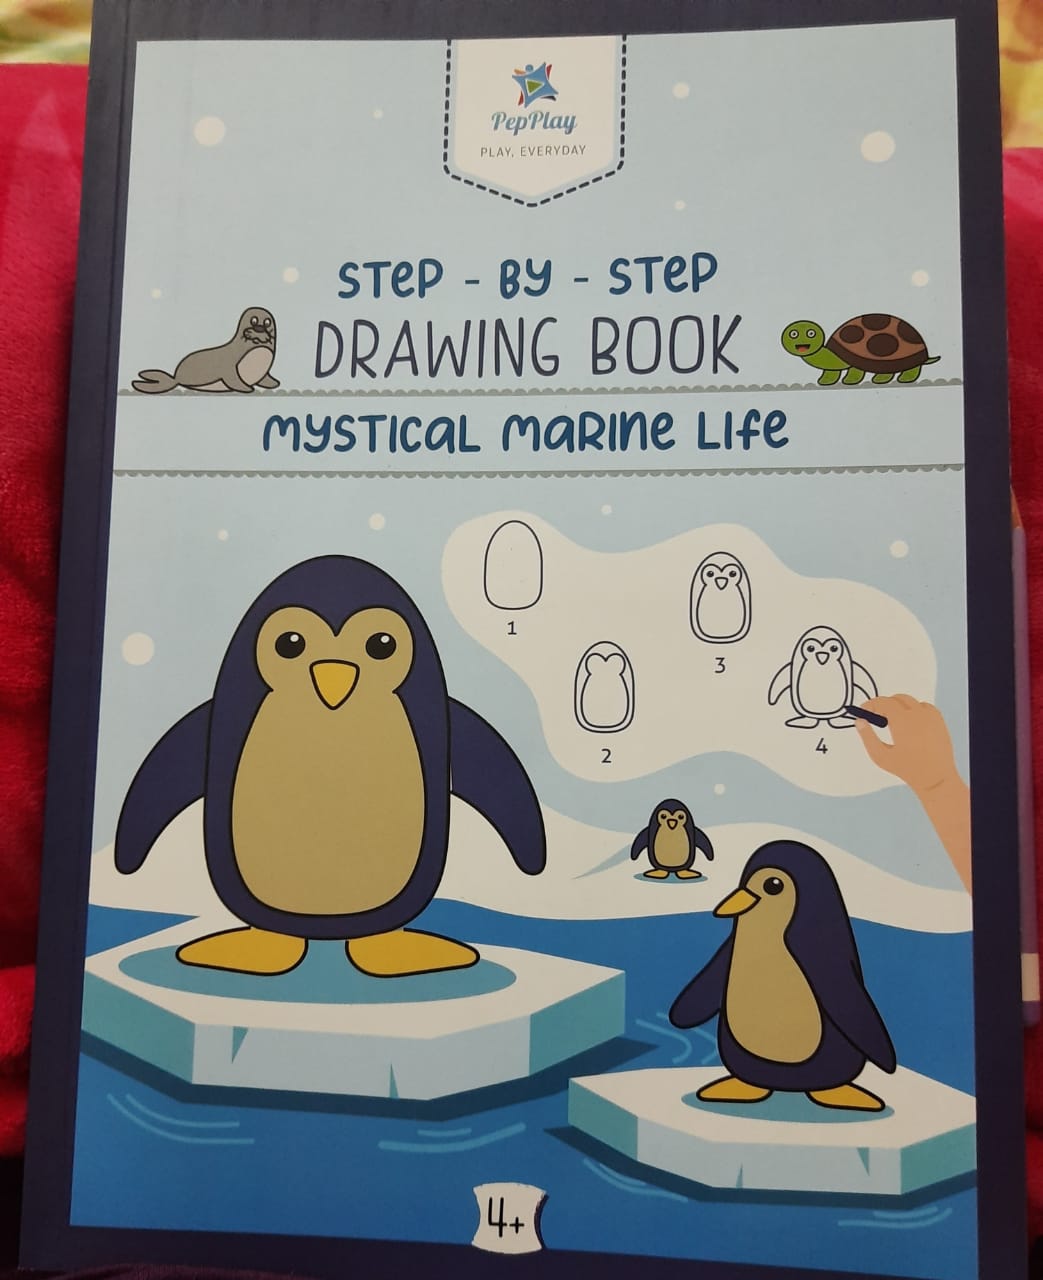 Review: Step-By-Step DRAWING BOOK (Mystical Marine Life)